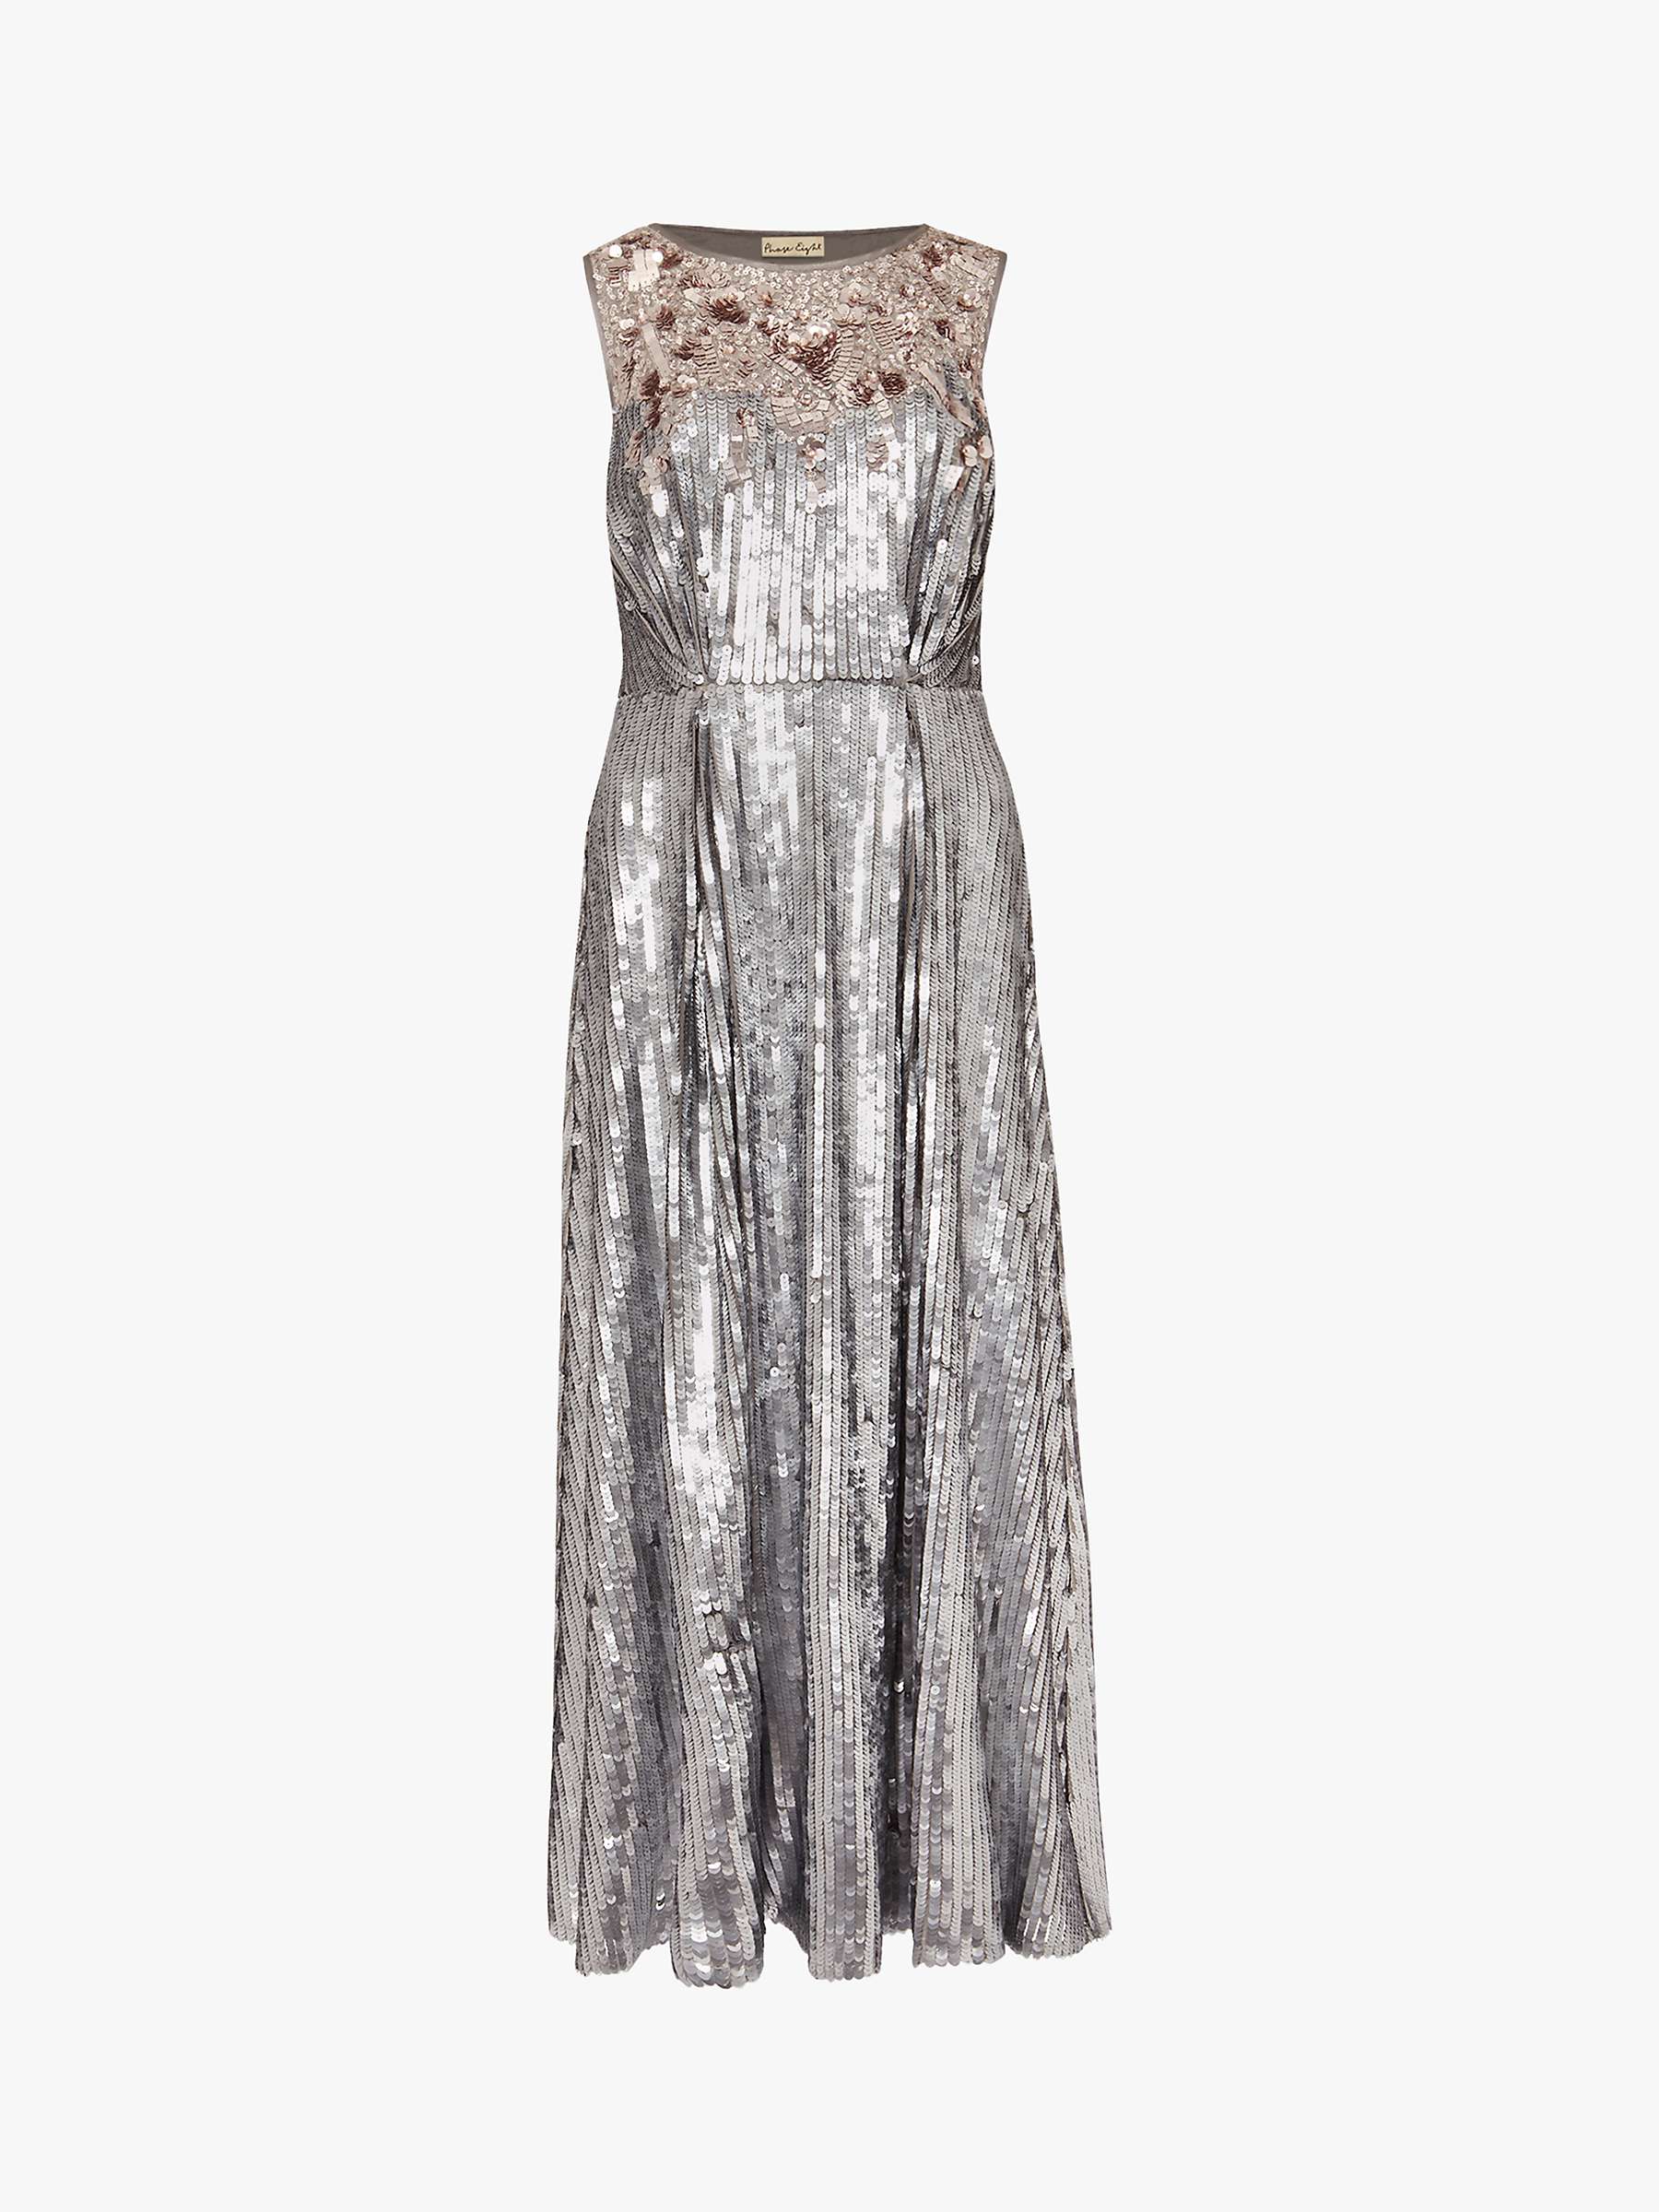 Buy Phase Eight Lainey Shimmer Sequined Midi Dress, Silver Online at johnlewis.com